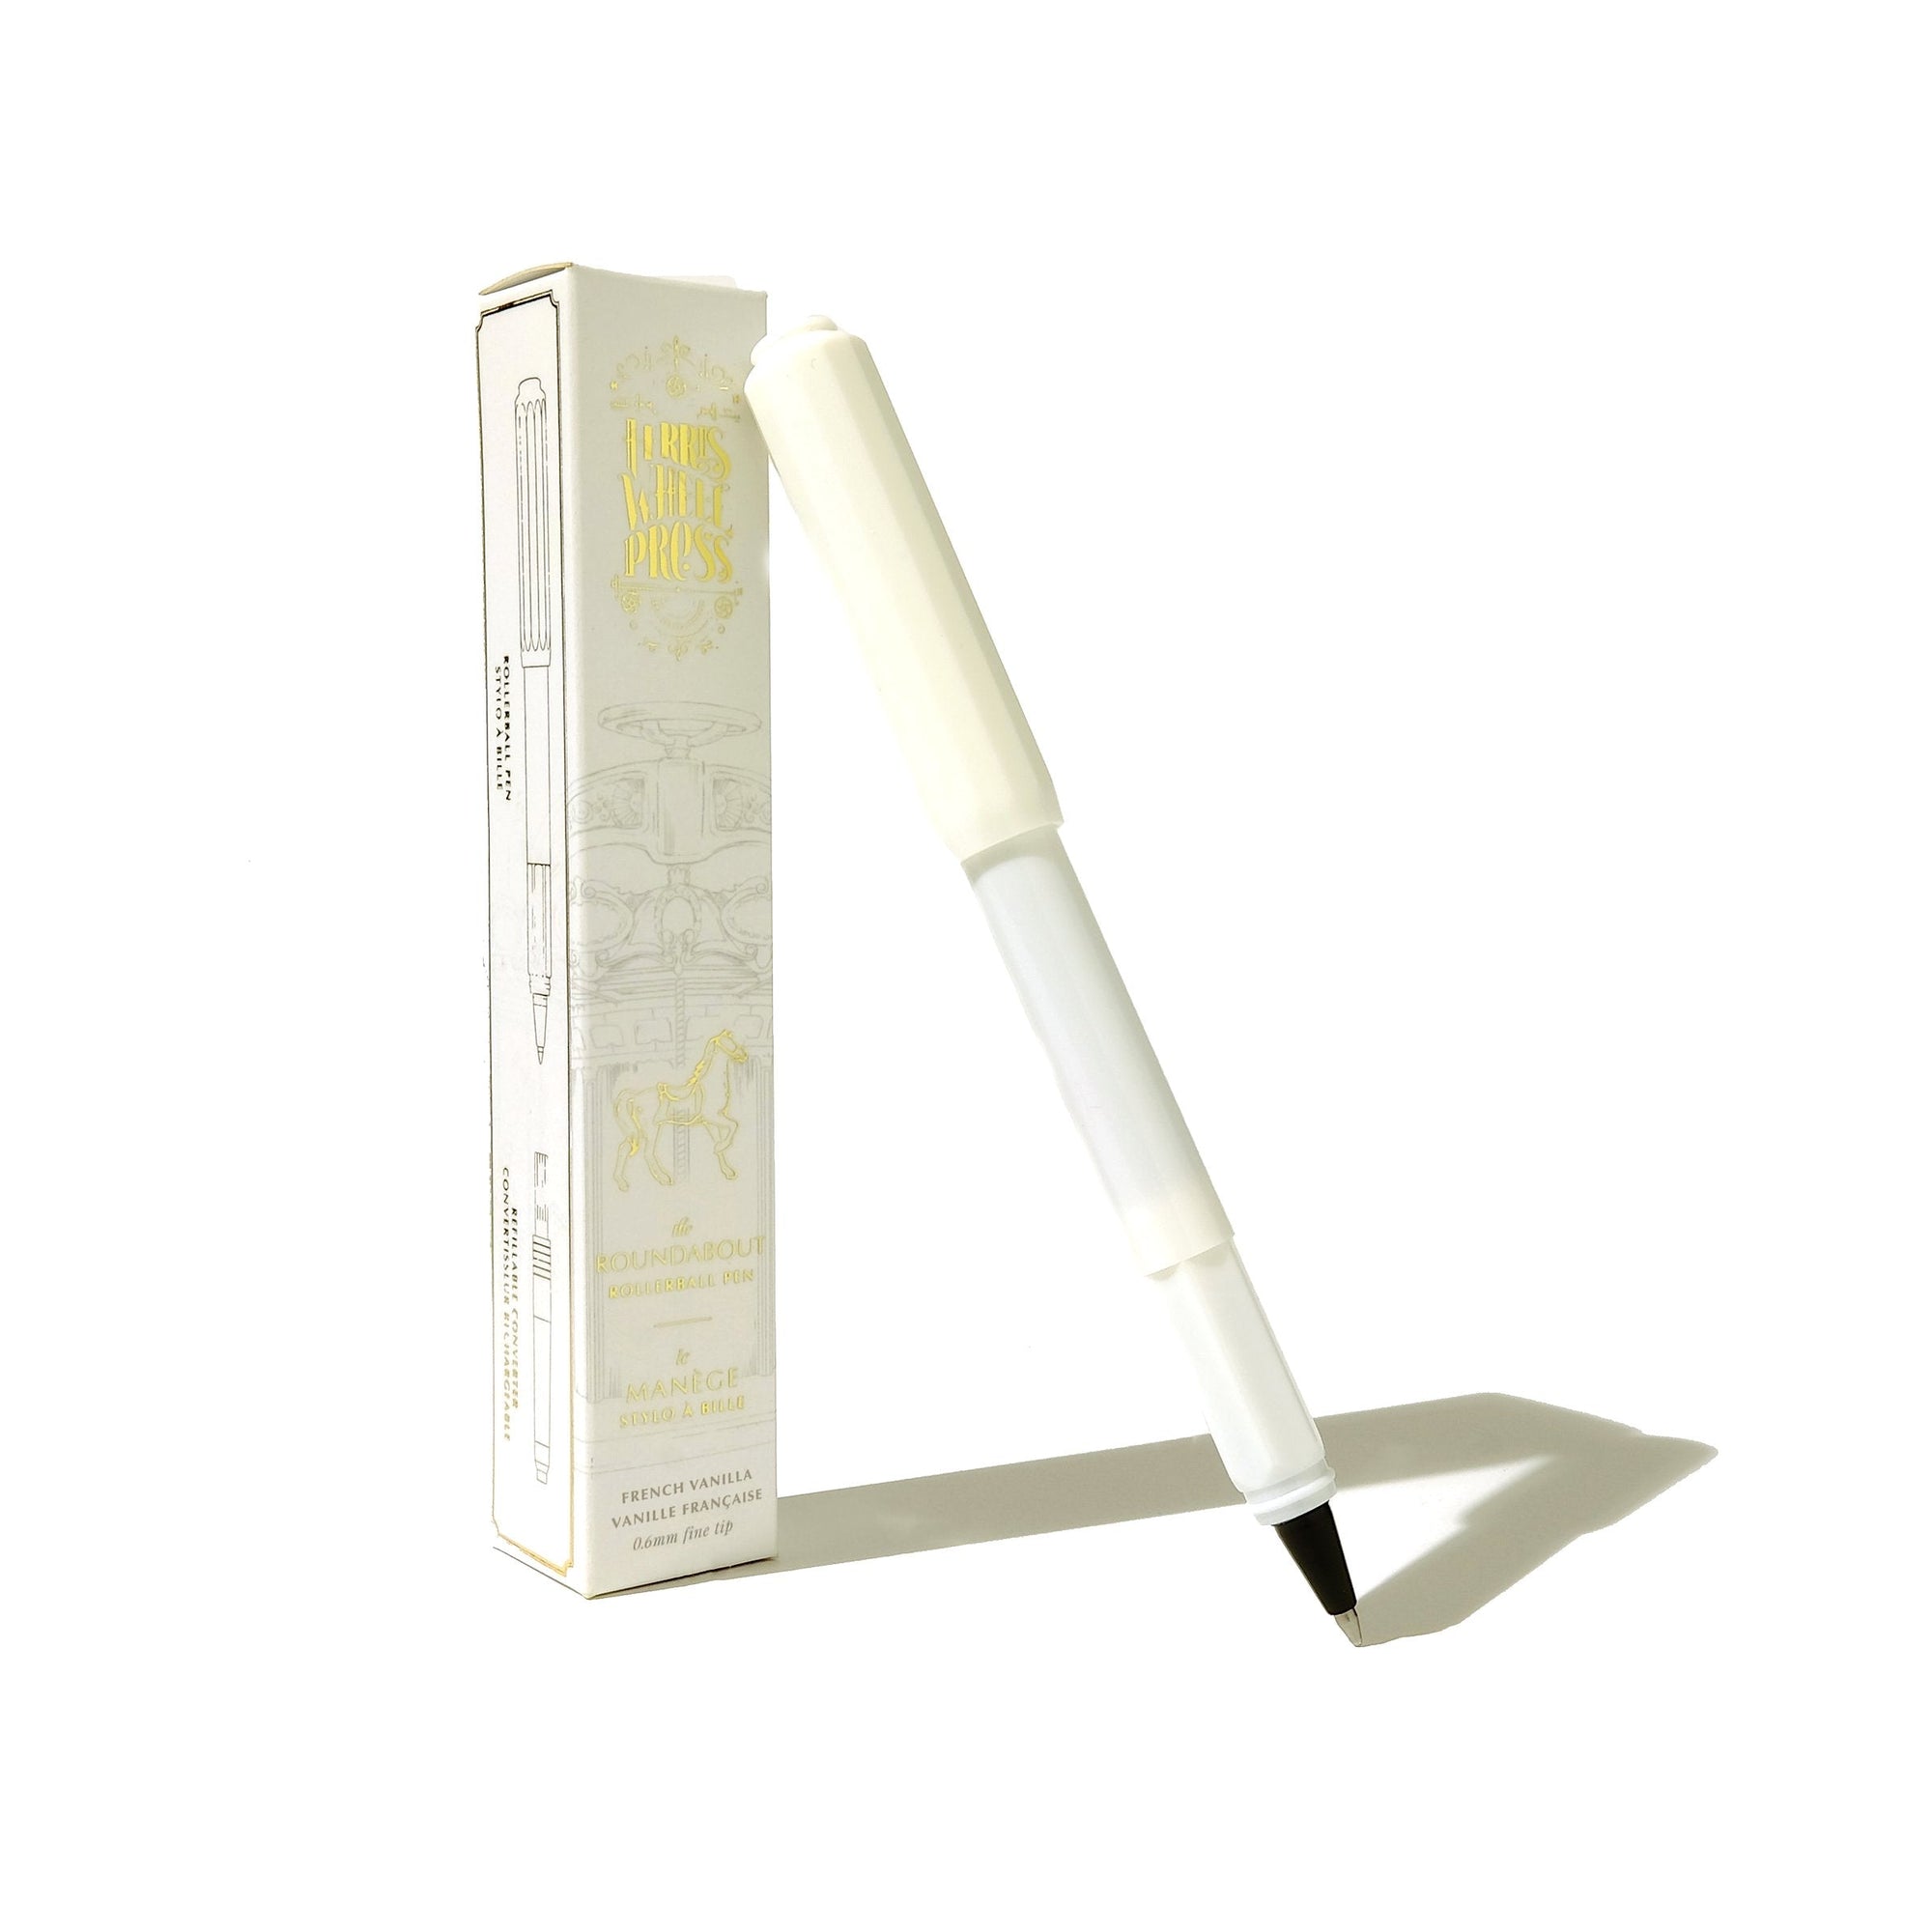 Ferris Wheel Press Roundabout Rollerball Pen with Converter - French Vanilla - Blesket Canada